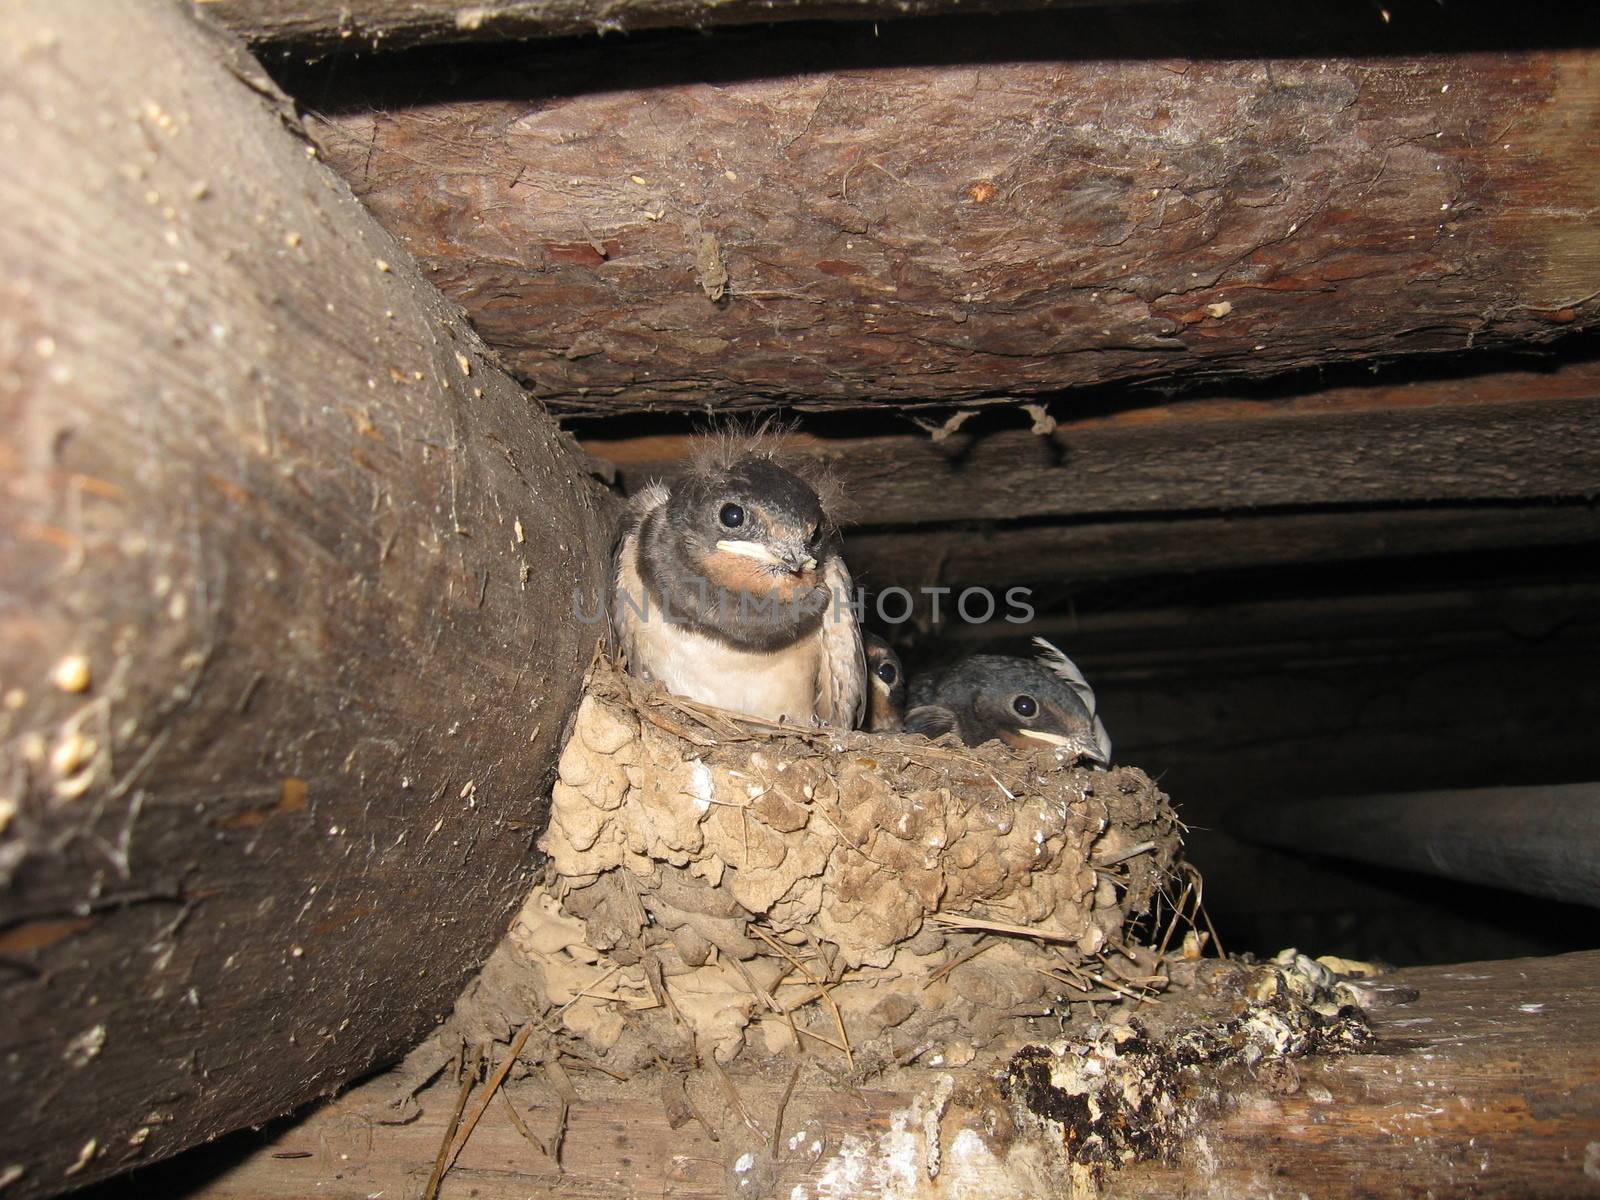 Nest of a swallow with nestlings by alexmak